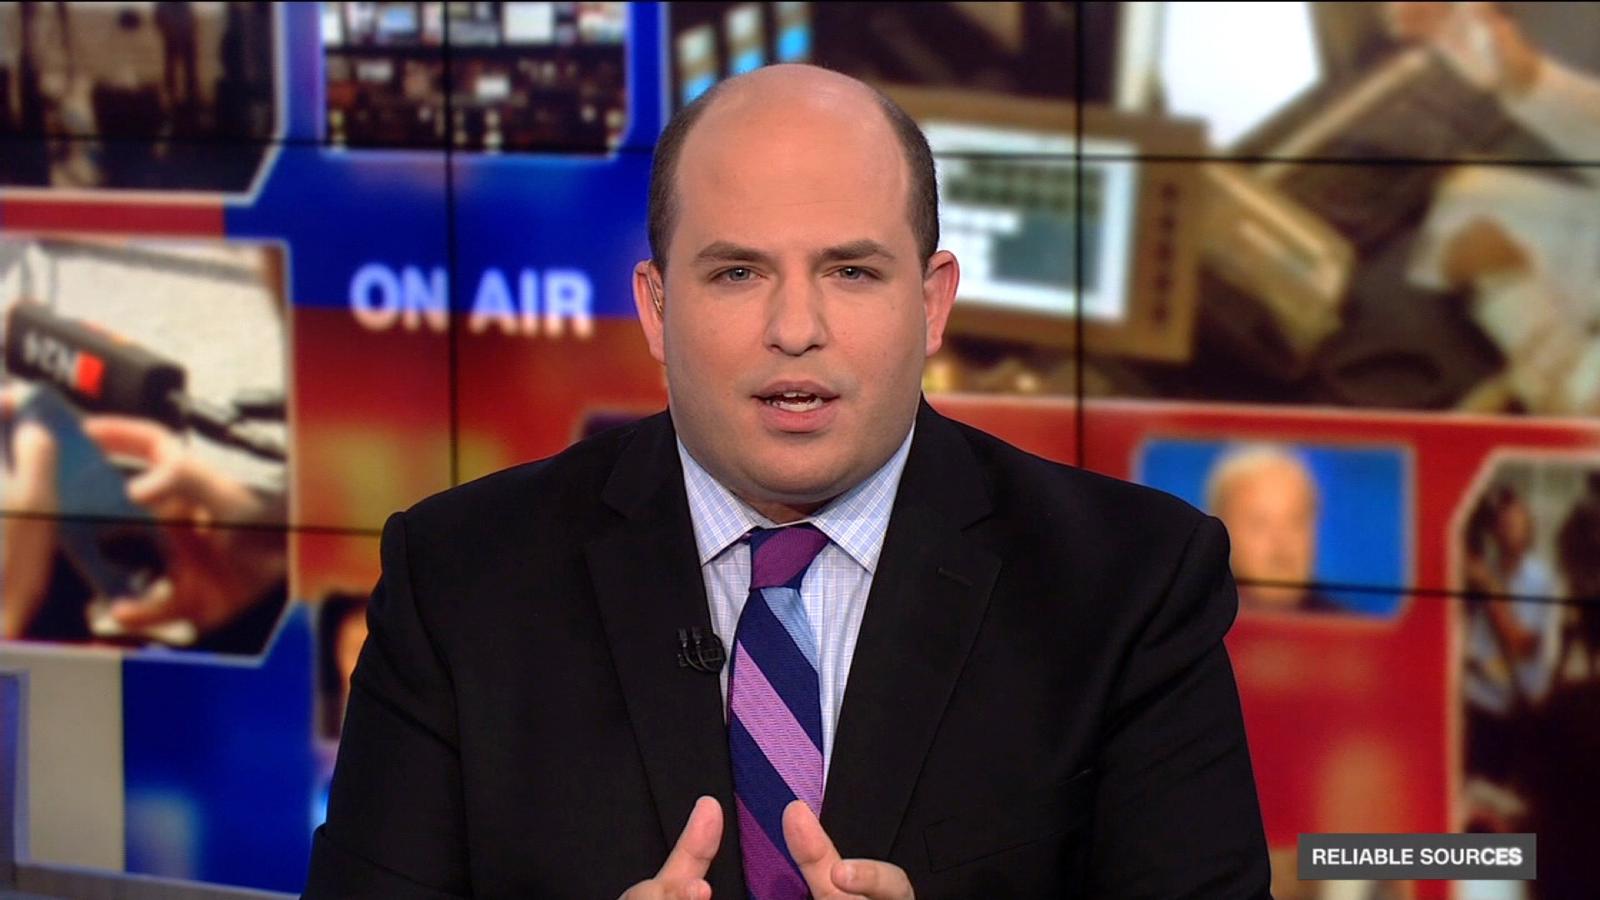 Stelter Trump Cannot Be Trusted Cnn Video 